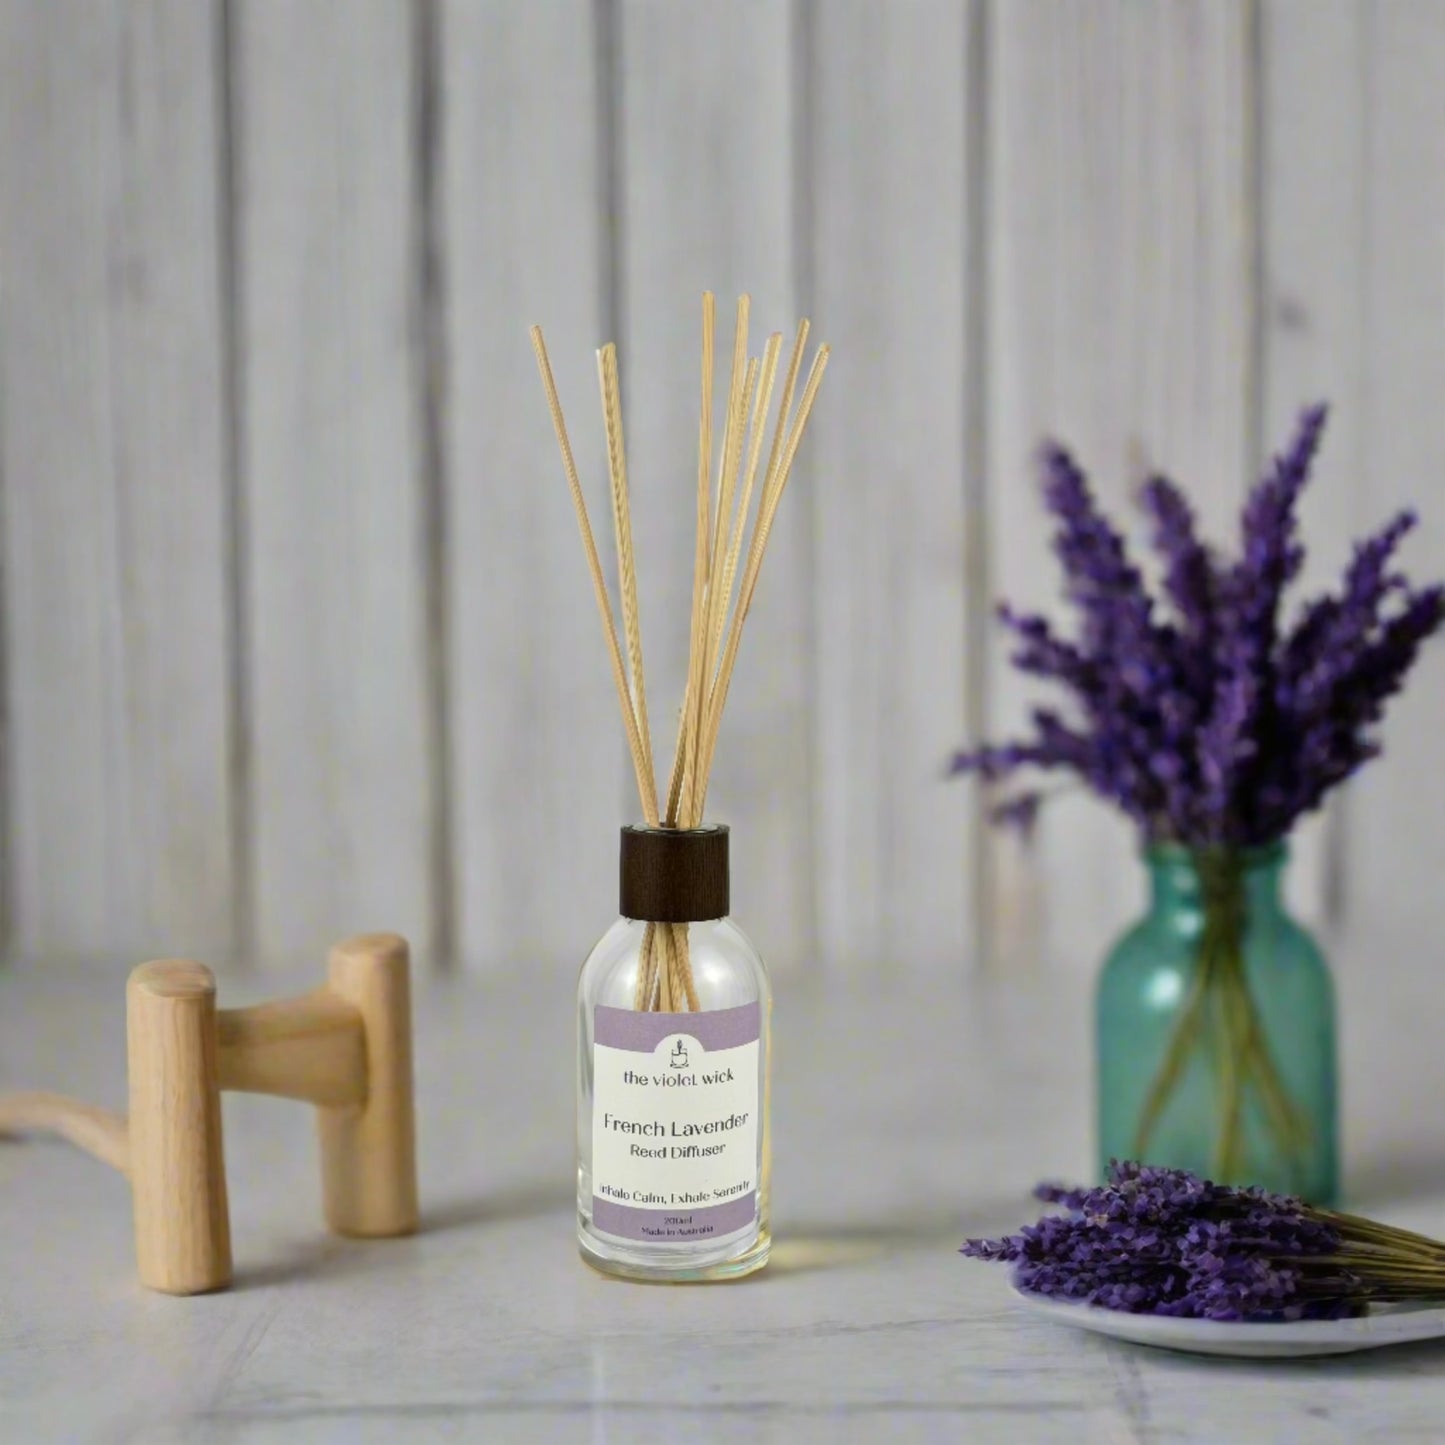 French Lavender reed diffuser from The Violet Wick